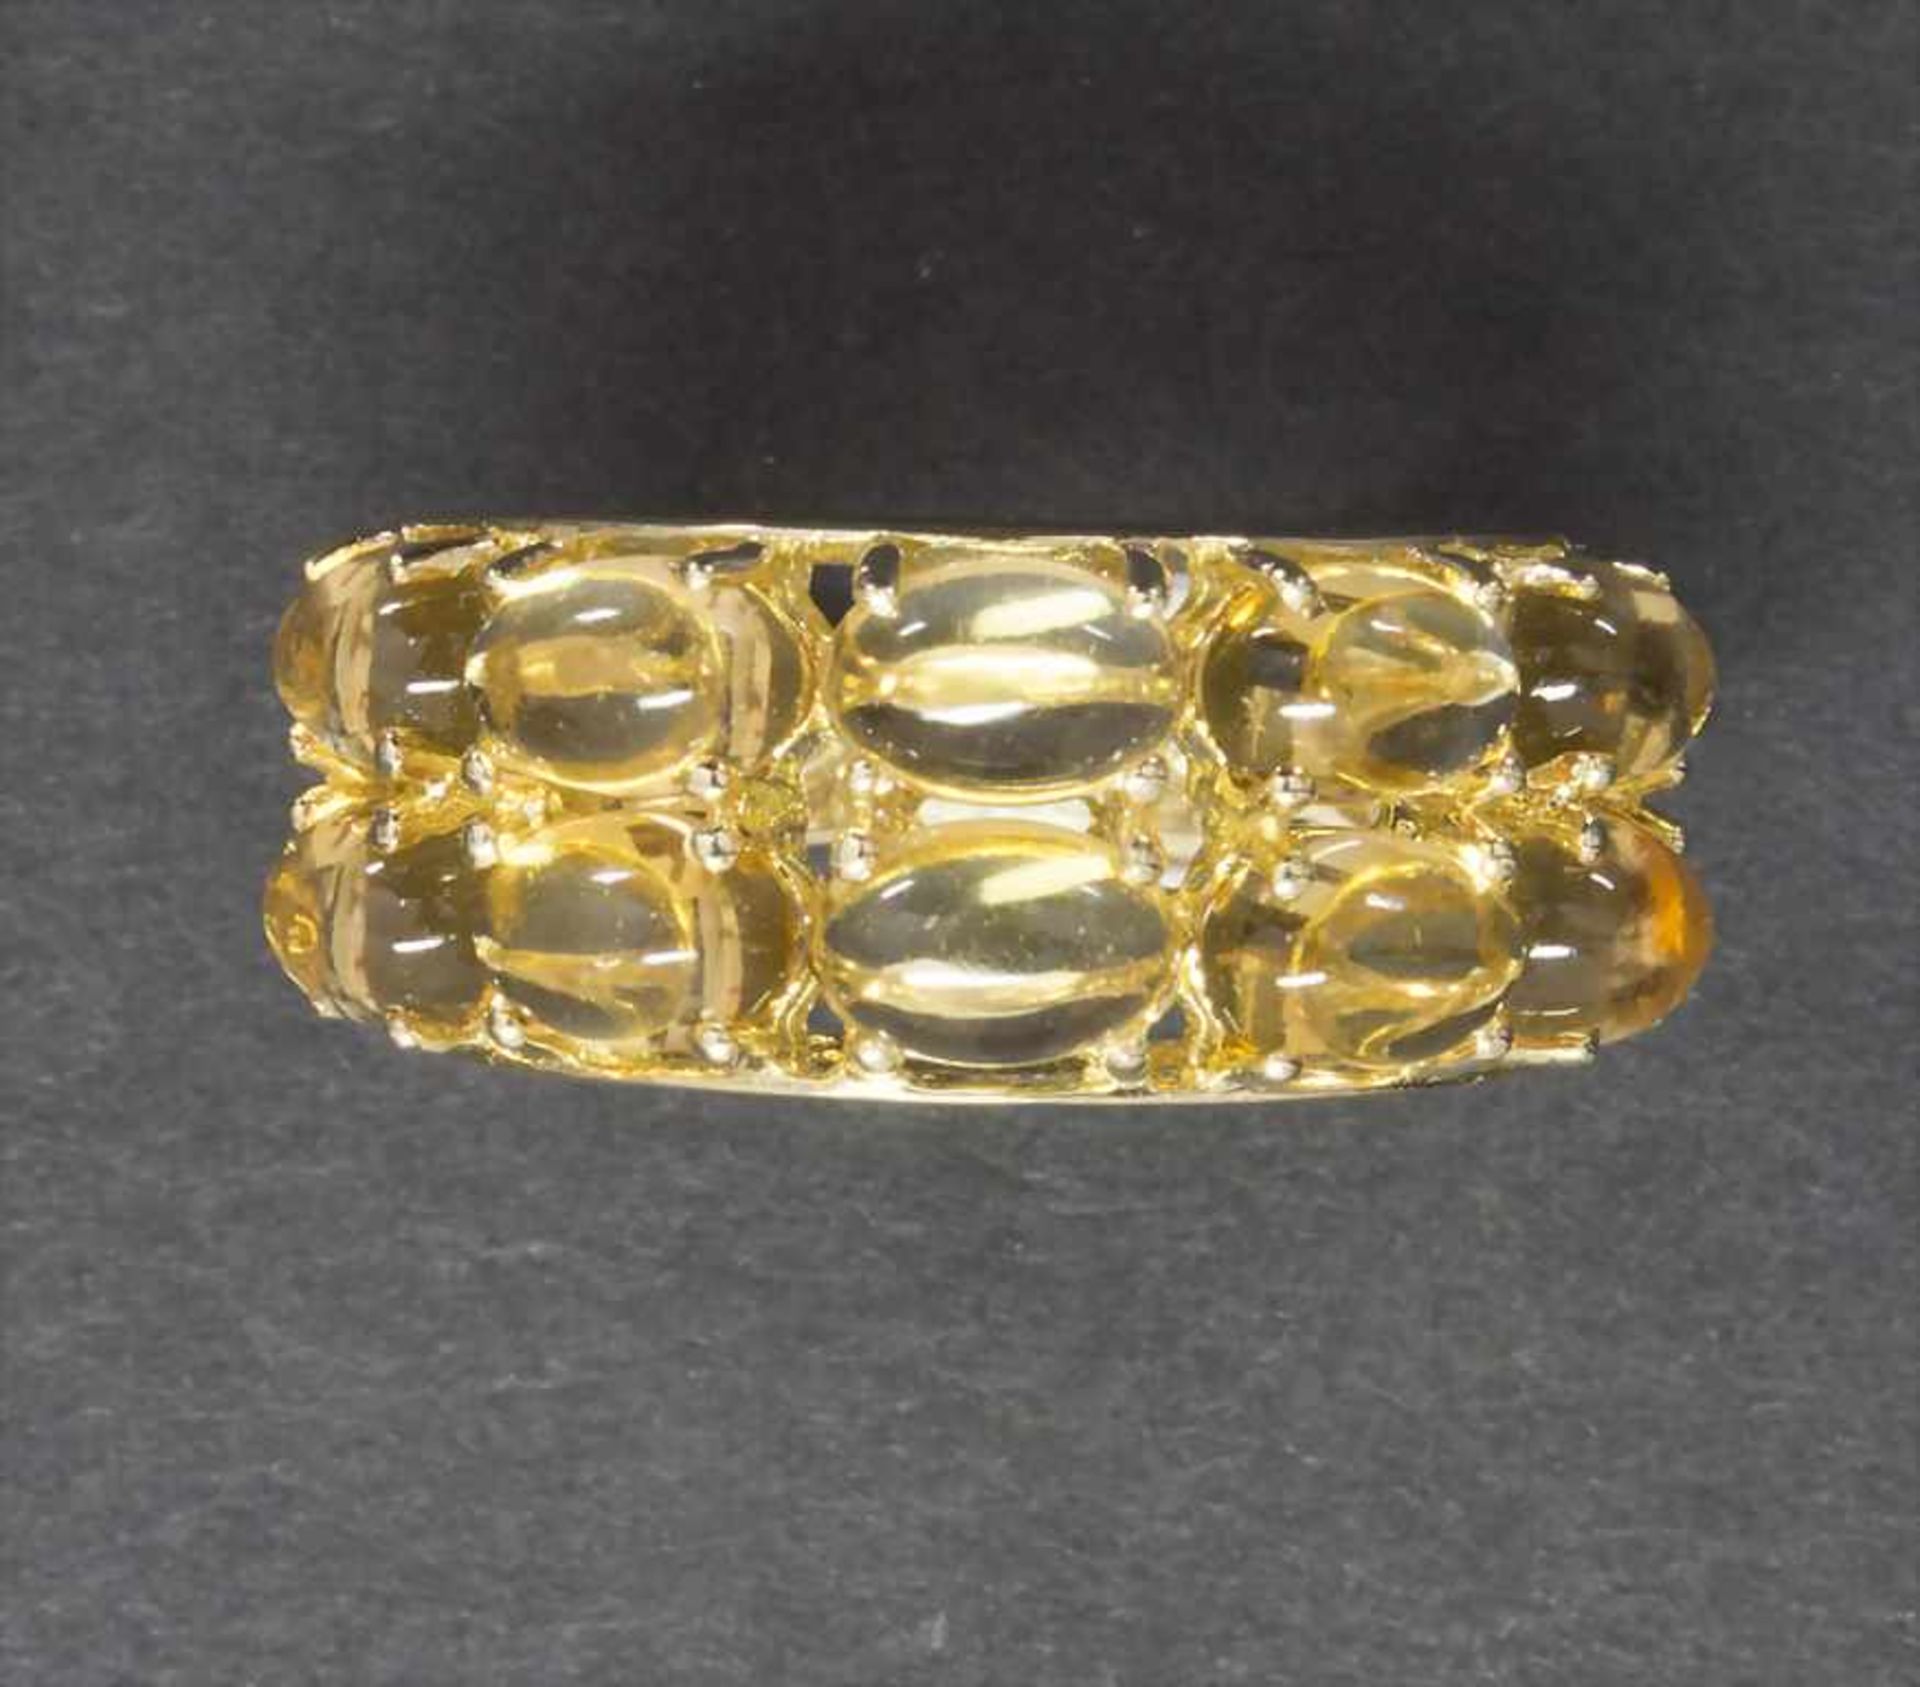 Damenring mit Citrin / A ladies ring with citrine